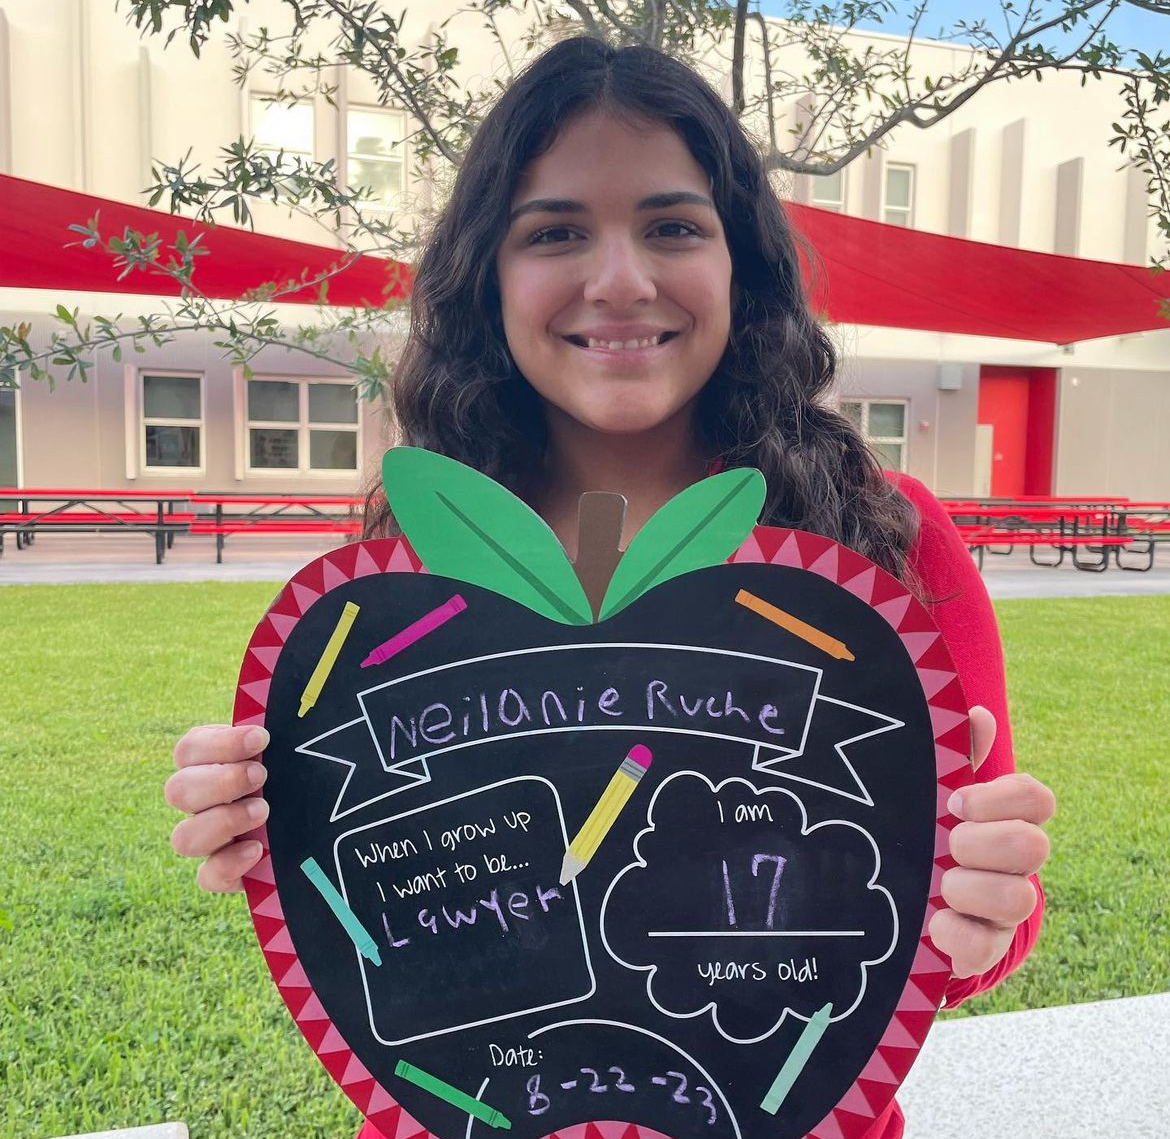 In her last year at Gables, Neilanie hopes to inspire others to join the Teaching Academy one last time.